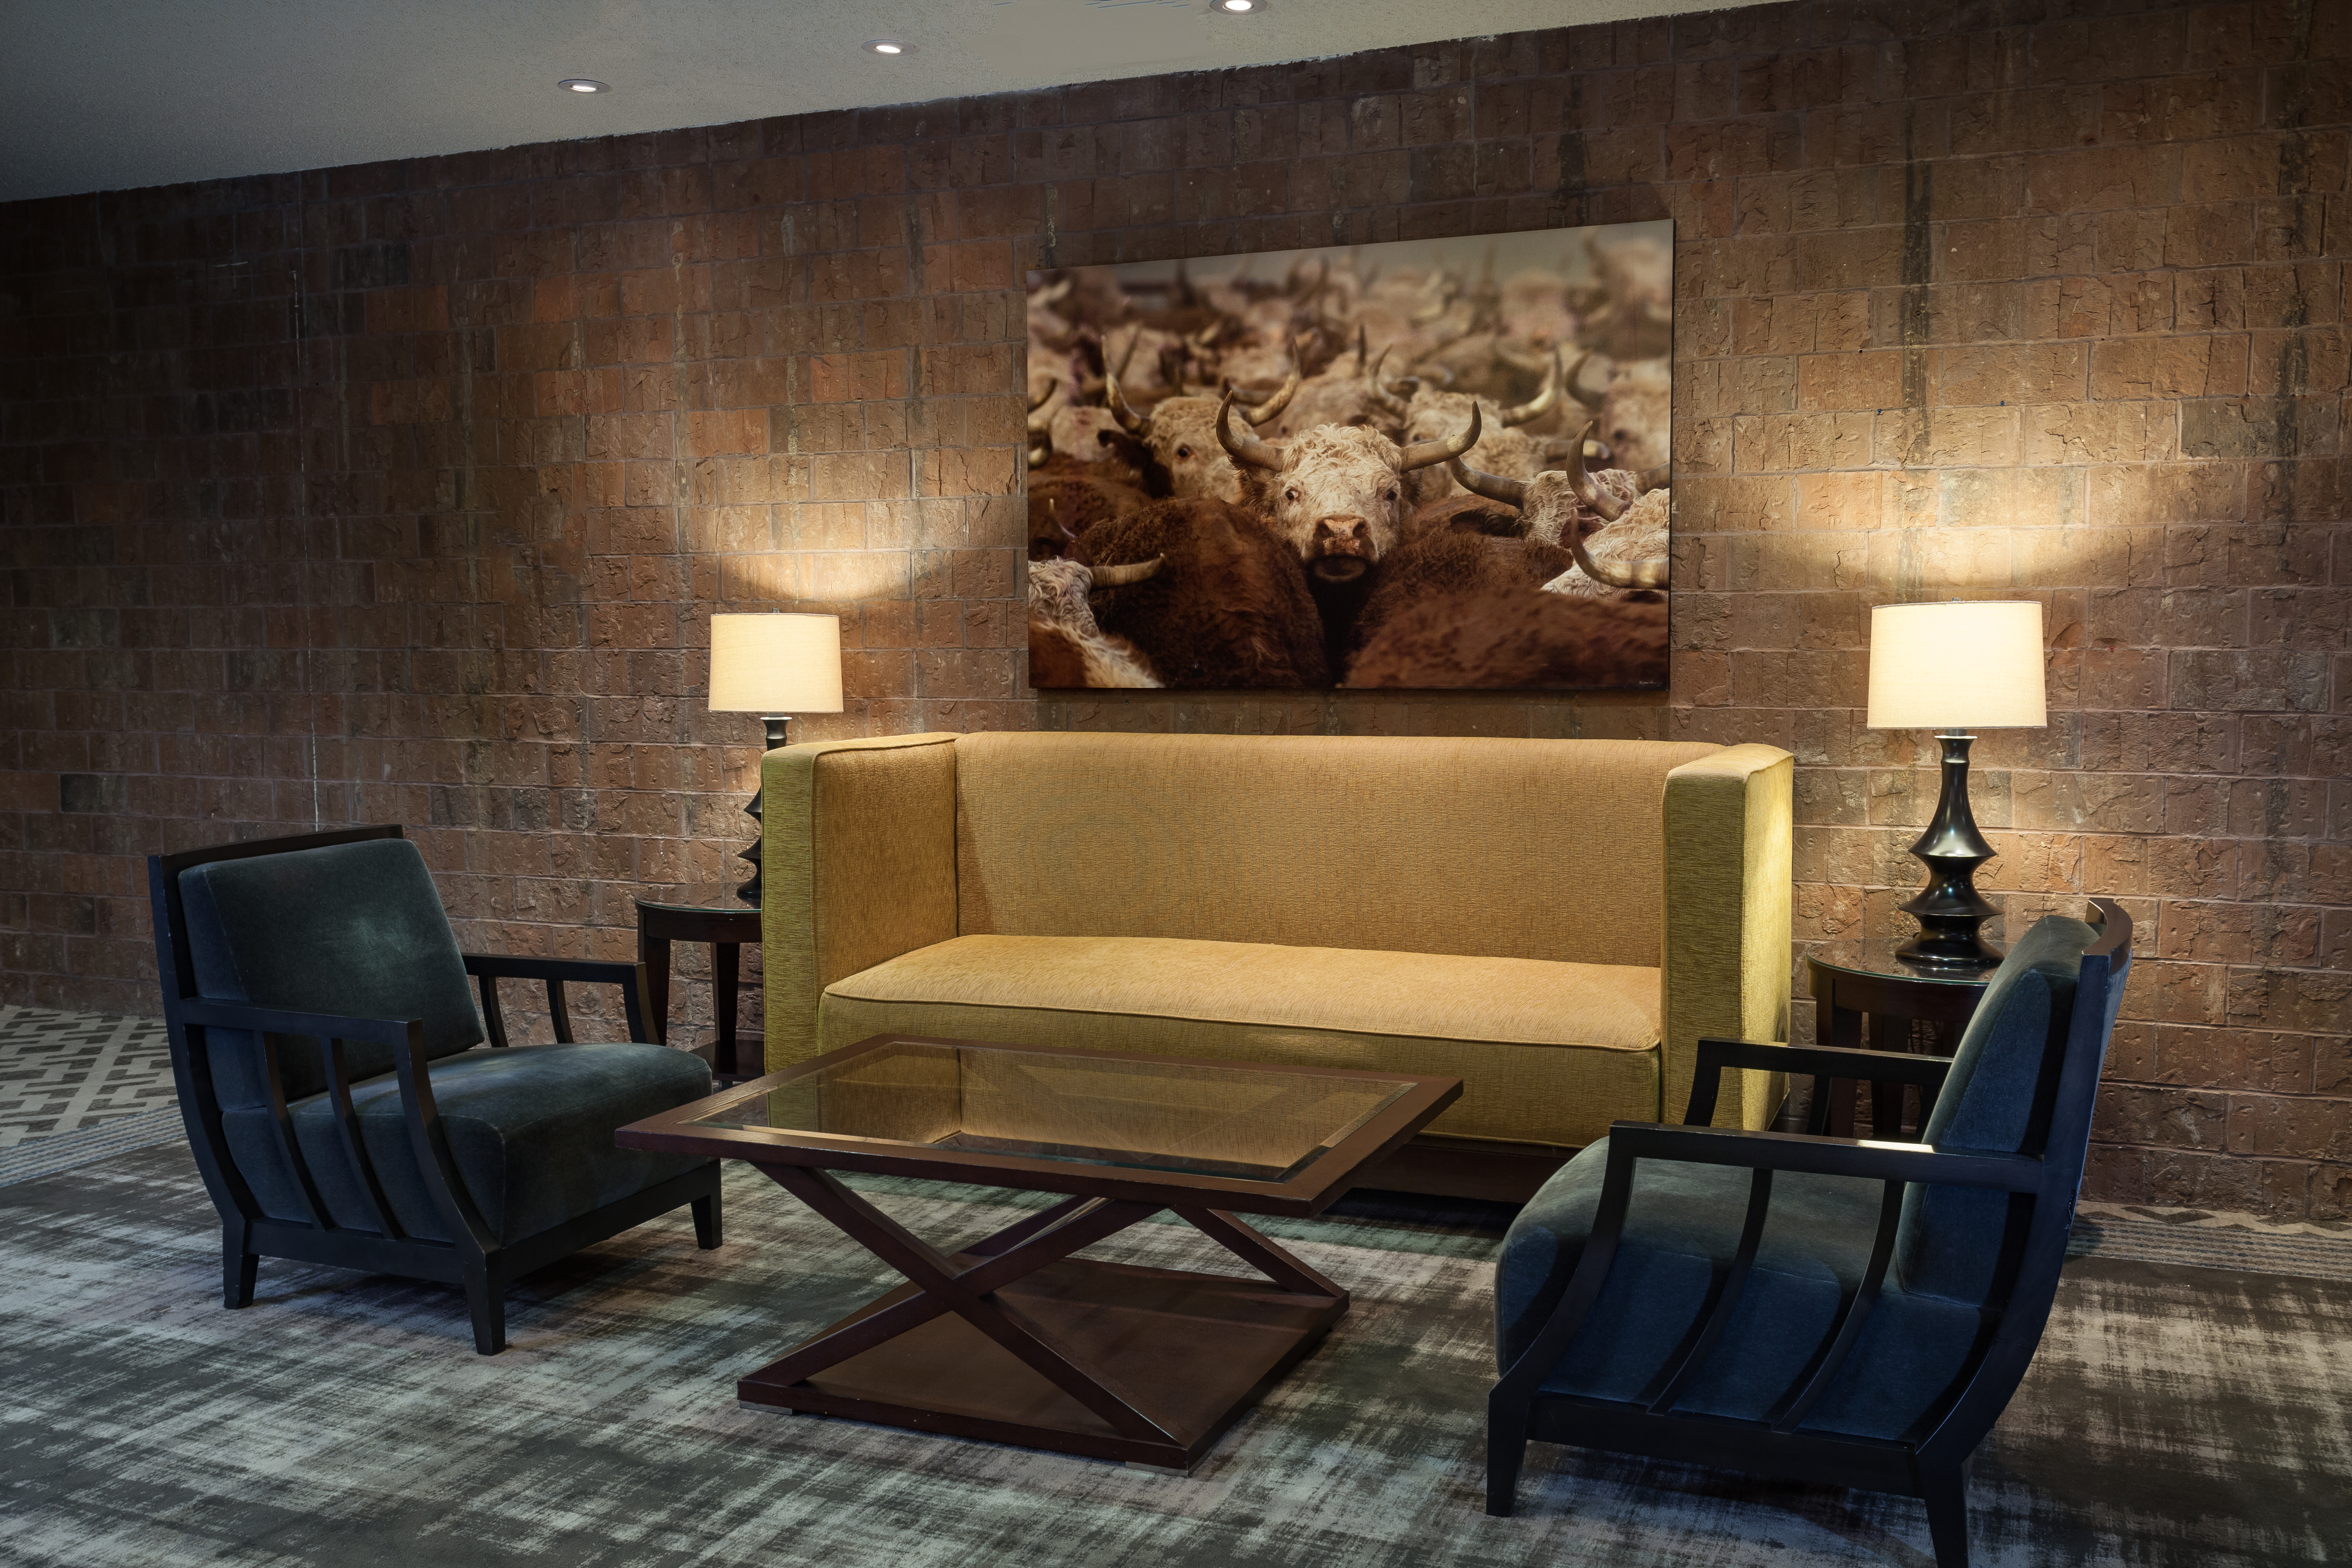 Wall Art, Illuminated Lamps, Coffee Table and Conversational Seating in Lobby